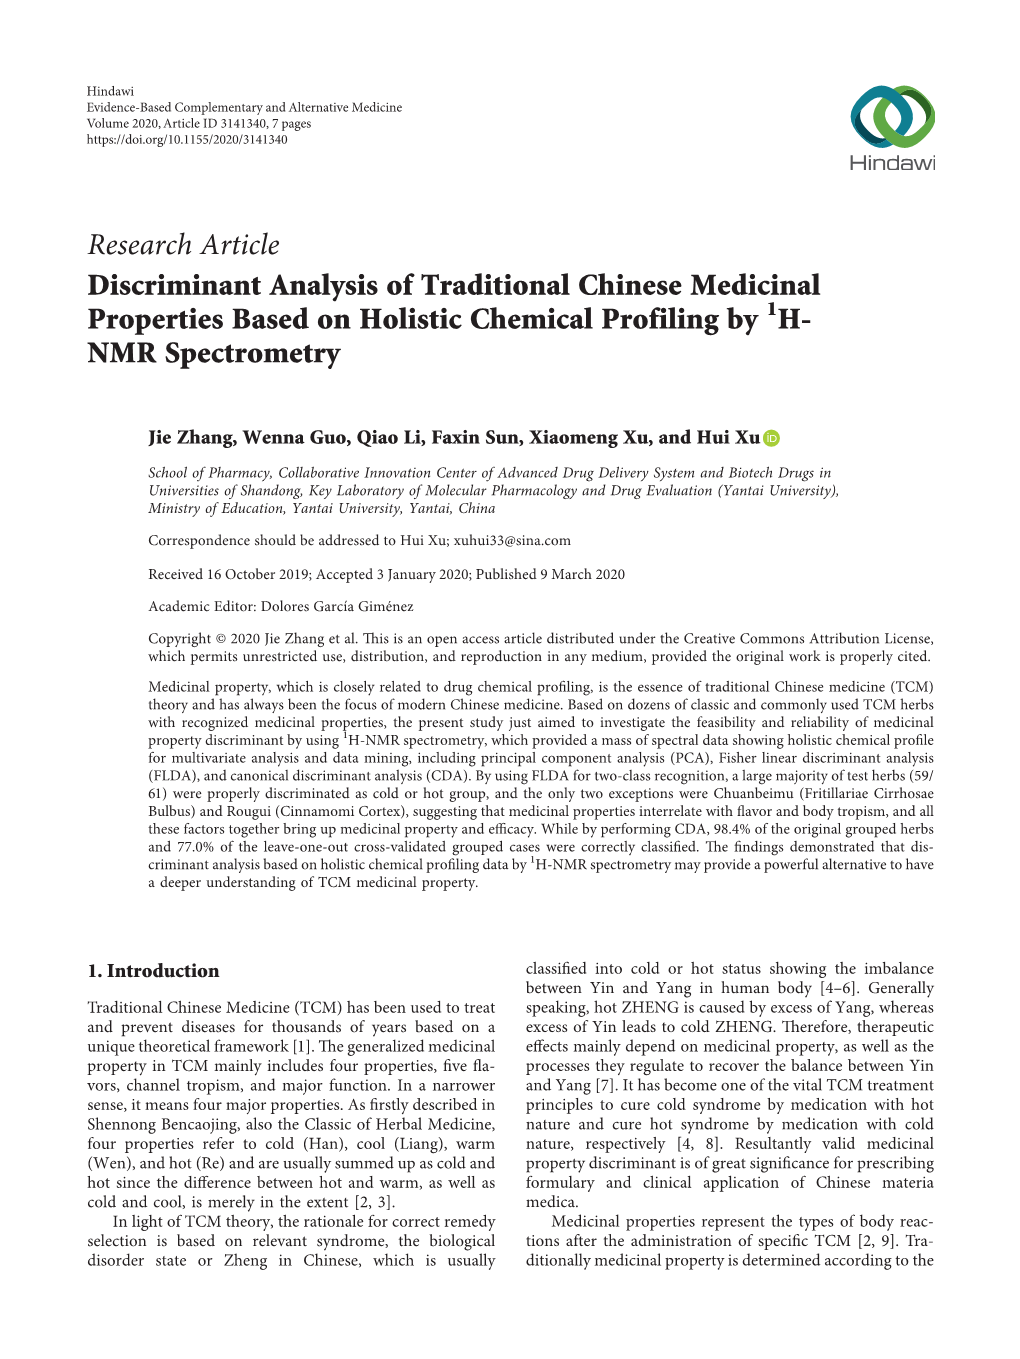 Discriminant Analysis of Traditional Chinese Medicinal Properties Based on Holistic Chemical Profiling by 1H-NMR Spectrometry